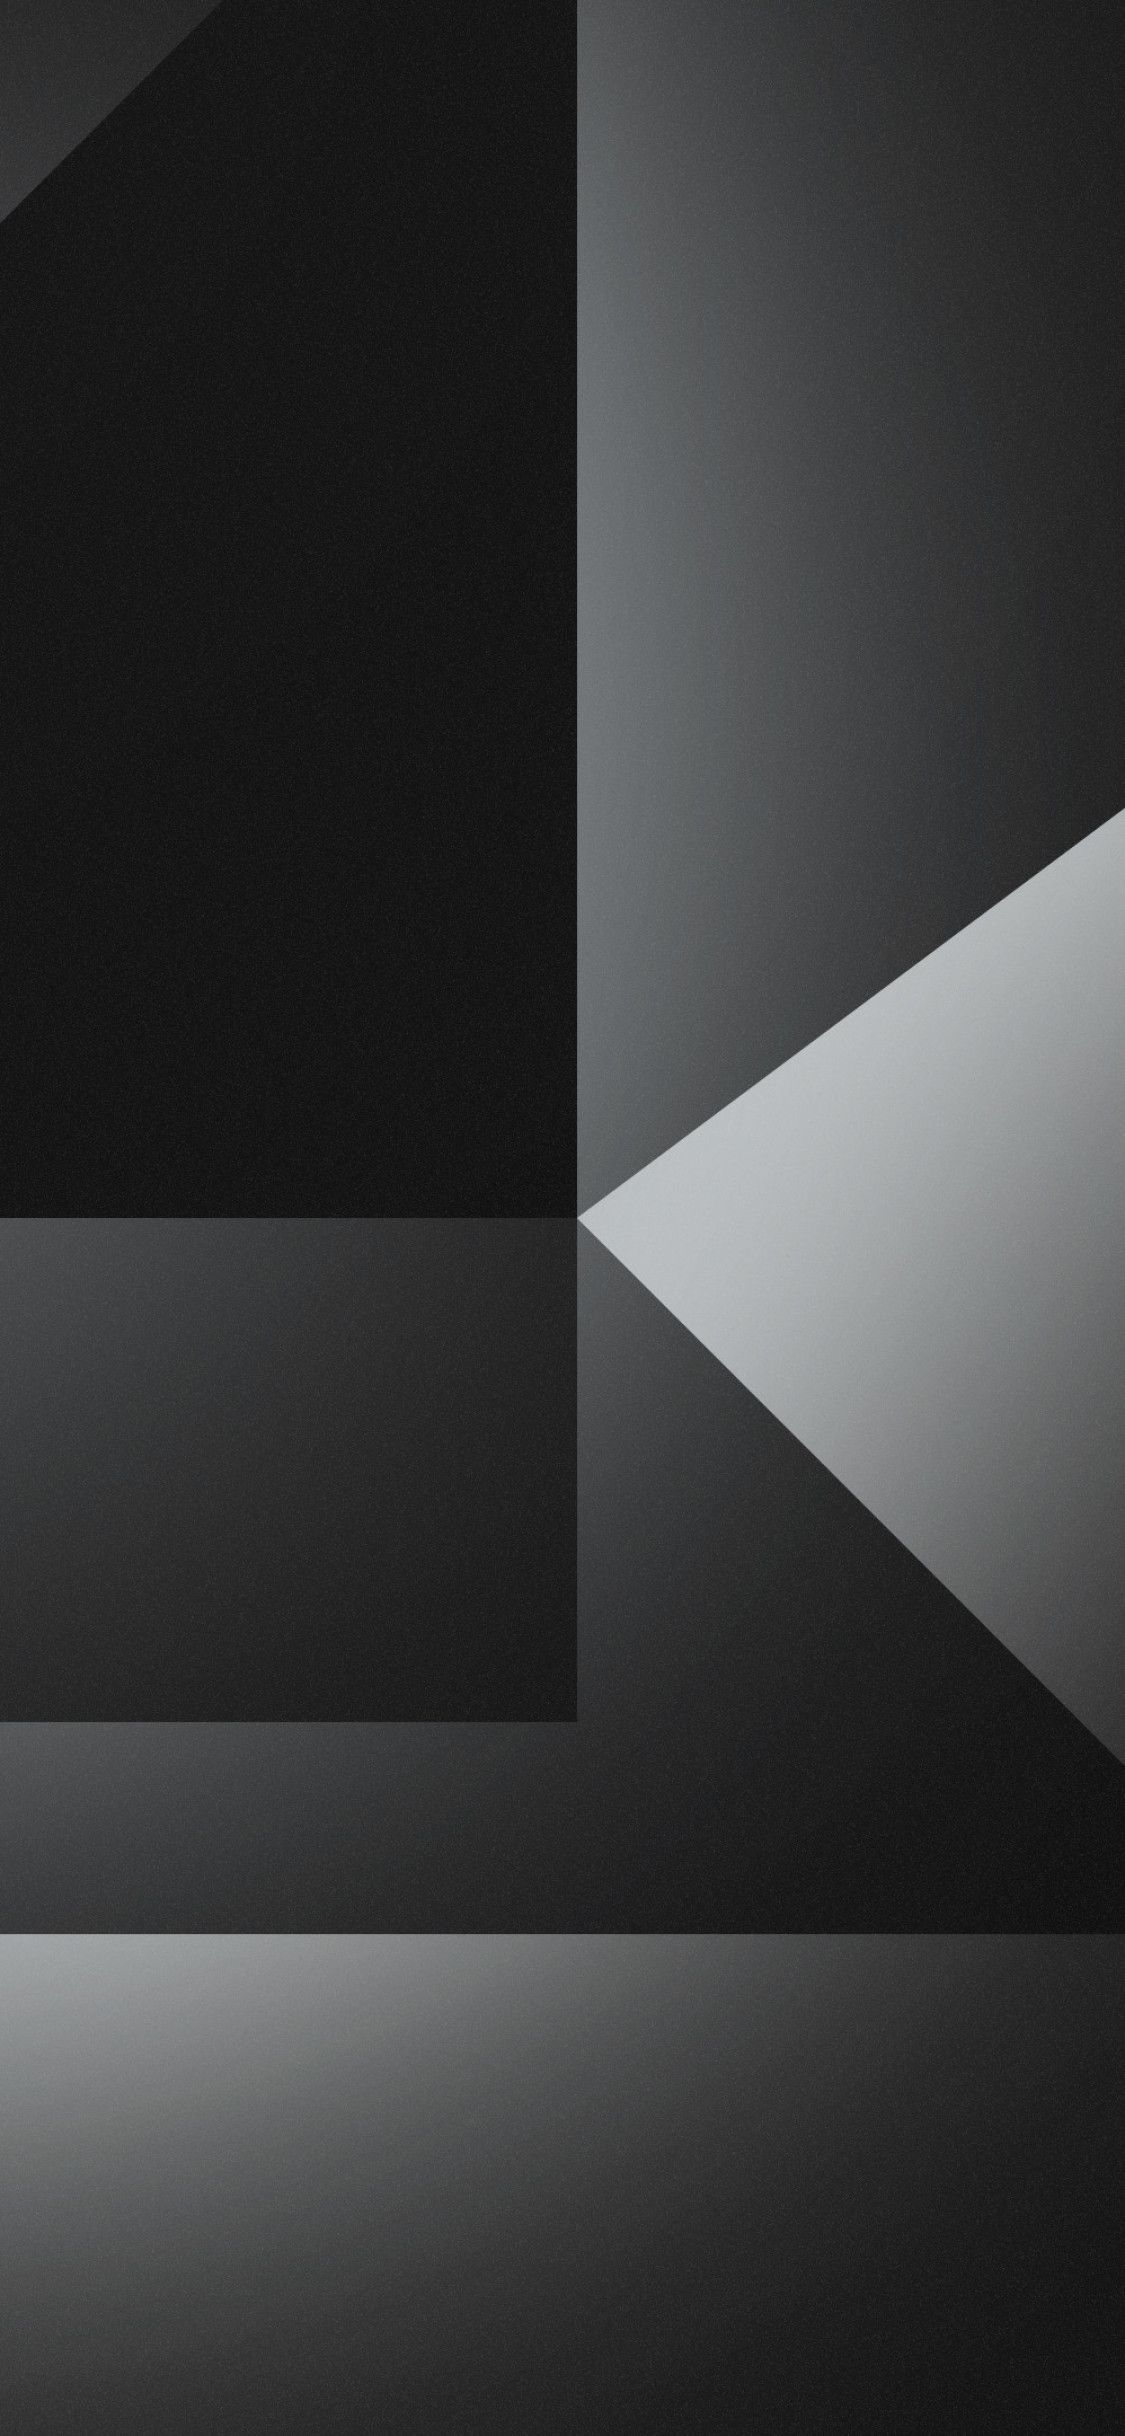 Dark Grey Abstract Shapes 4k iPhone XS, iPhone iPhone